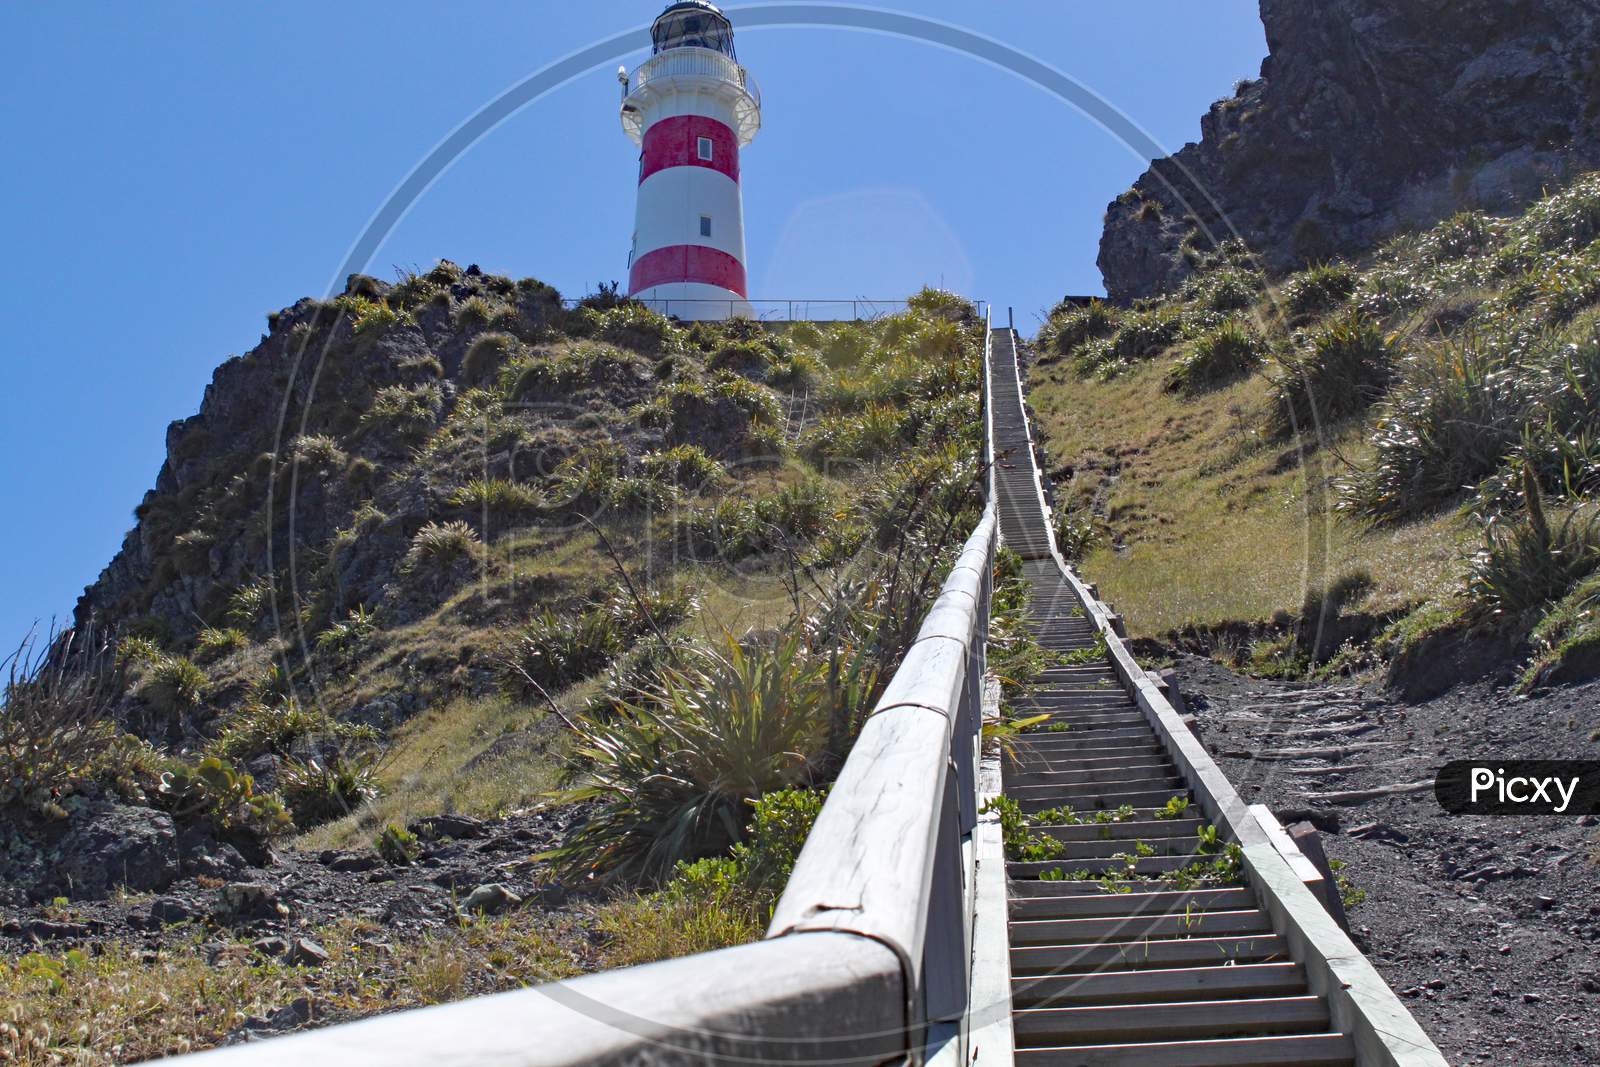 250 Steps Lead Up To The Red And White Striped Lighthouse At Cape Palliser On North Island, New Zealand. The Lighthouse Was Built In 1897 And Was Originally Fueled By Oil.